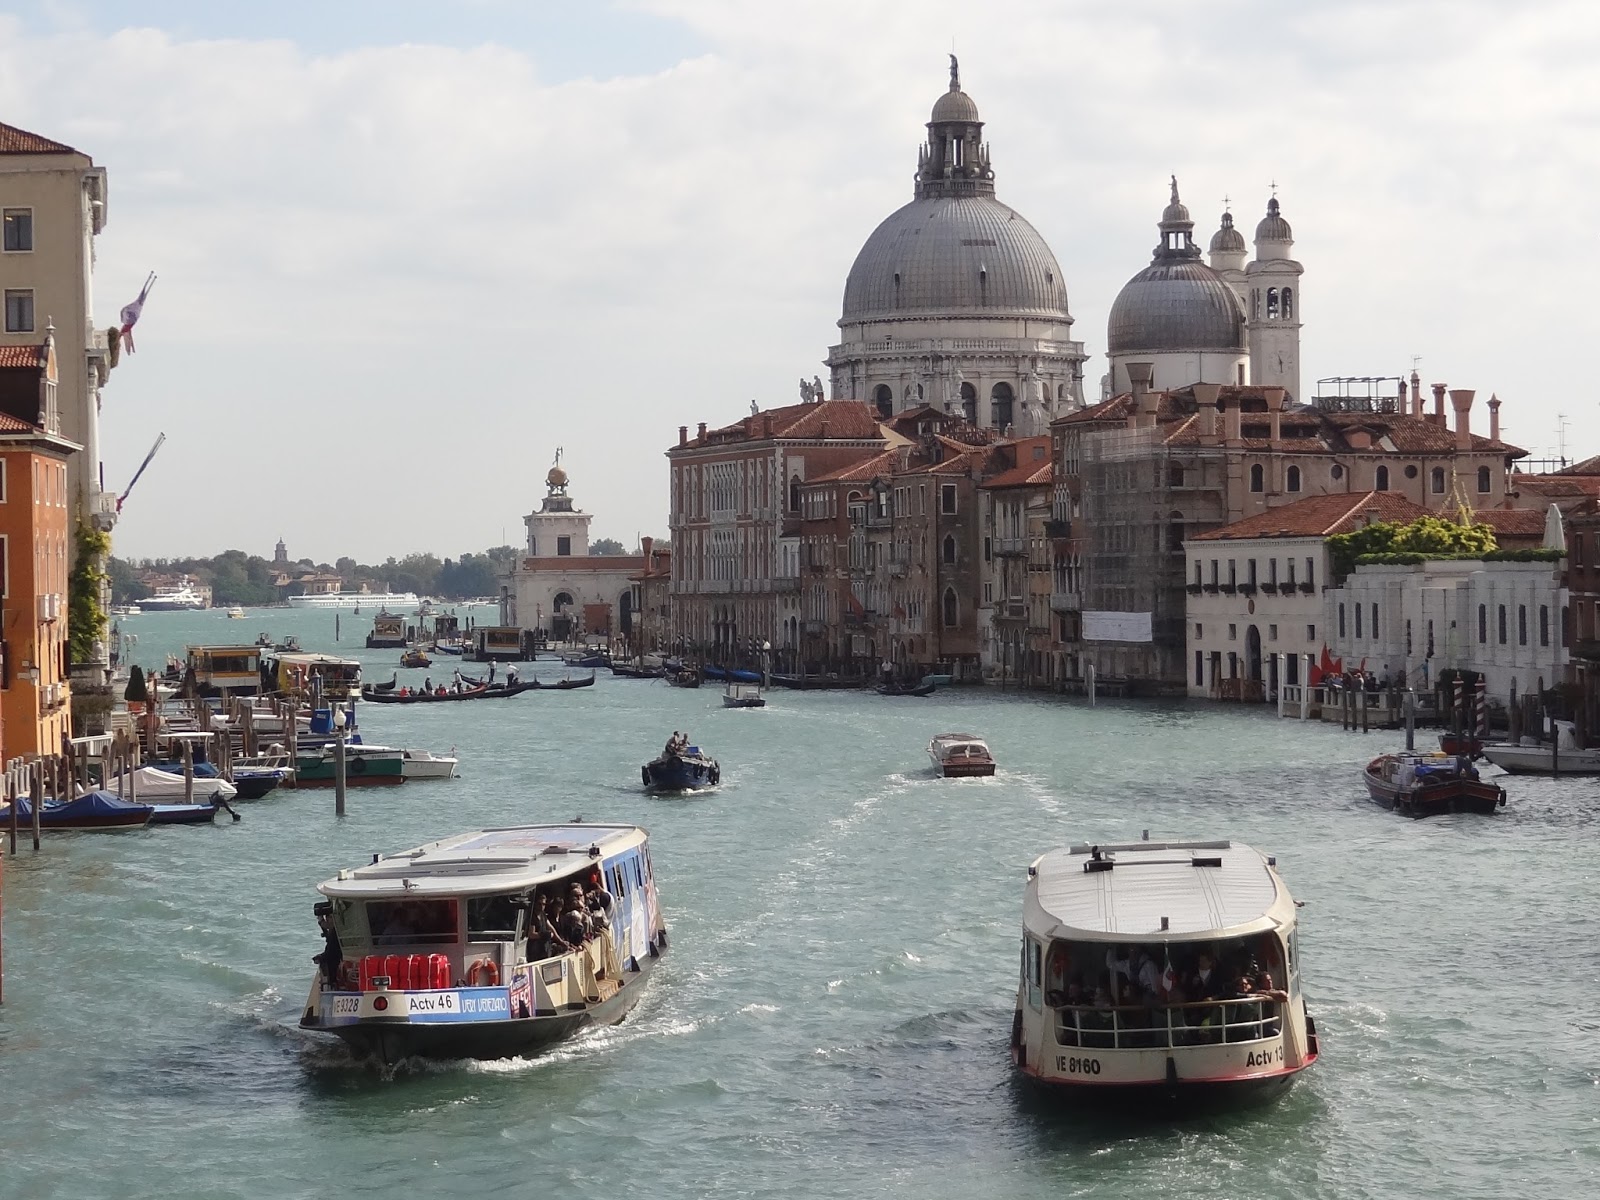 Grand canal containing water taxes with St. Mark's Basilica looming